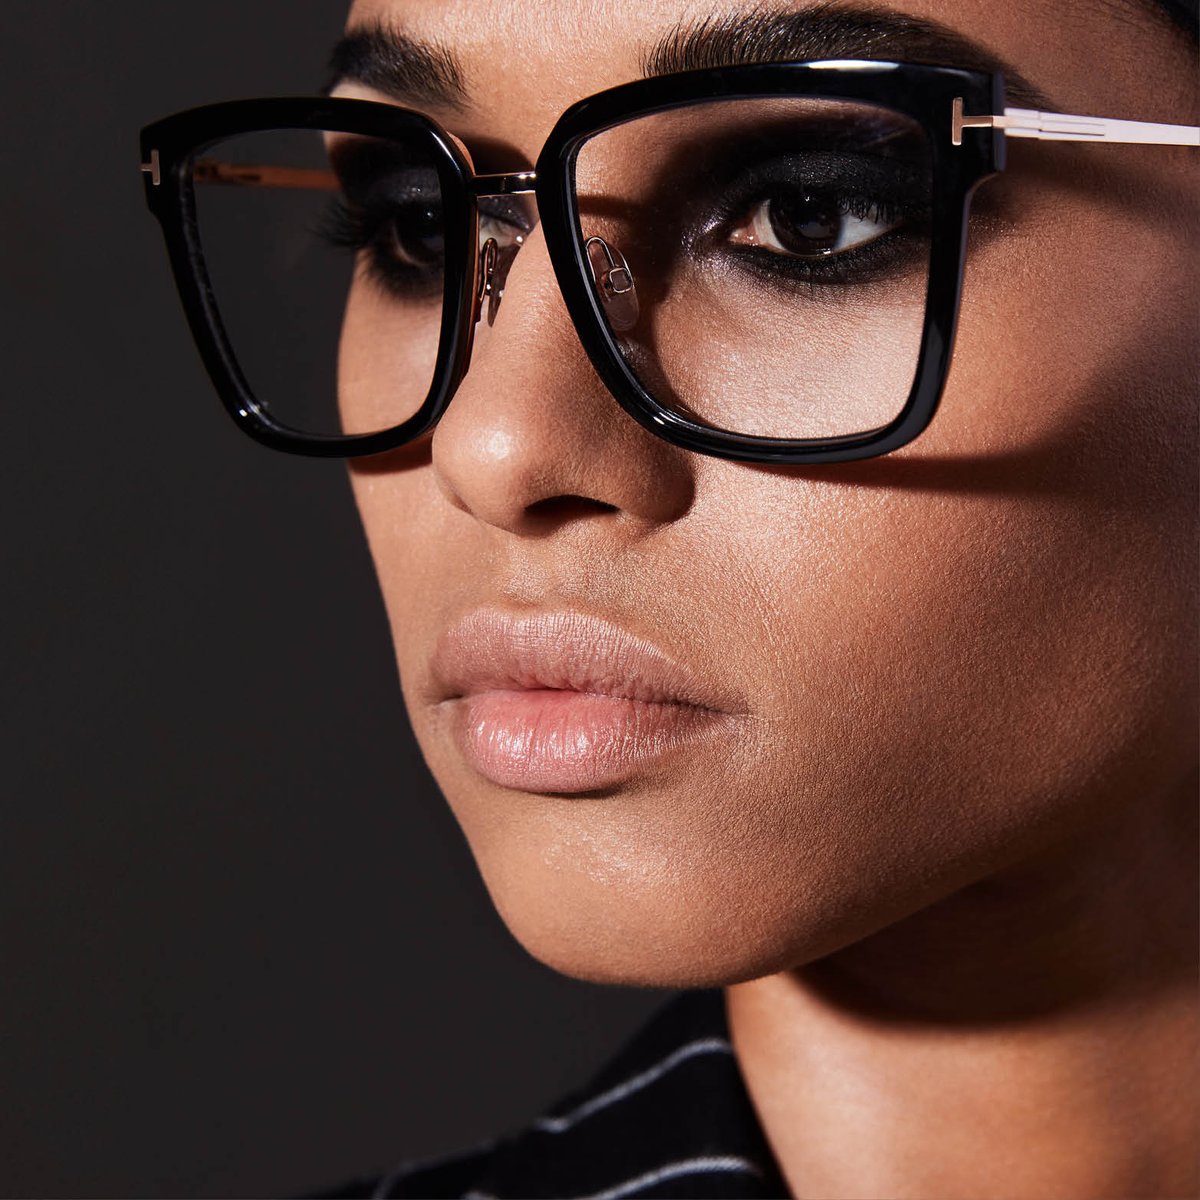 TOM FORD on Twitter: "Discover the collection of Women's TOM FORD Optical  Frames. https://t.co/vmarZayzWN #TOMFORD #TFEYEWEAR  https://t.co/bGCbOHZYak" / Twitter